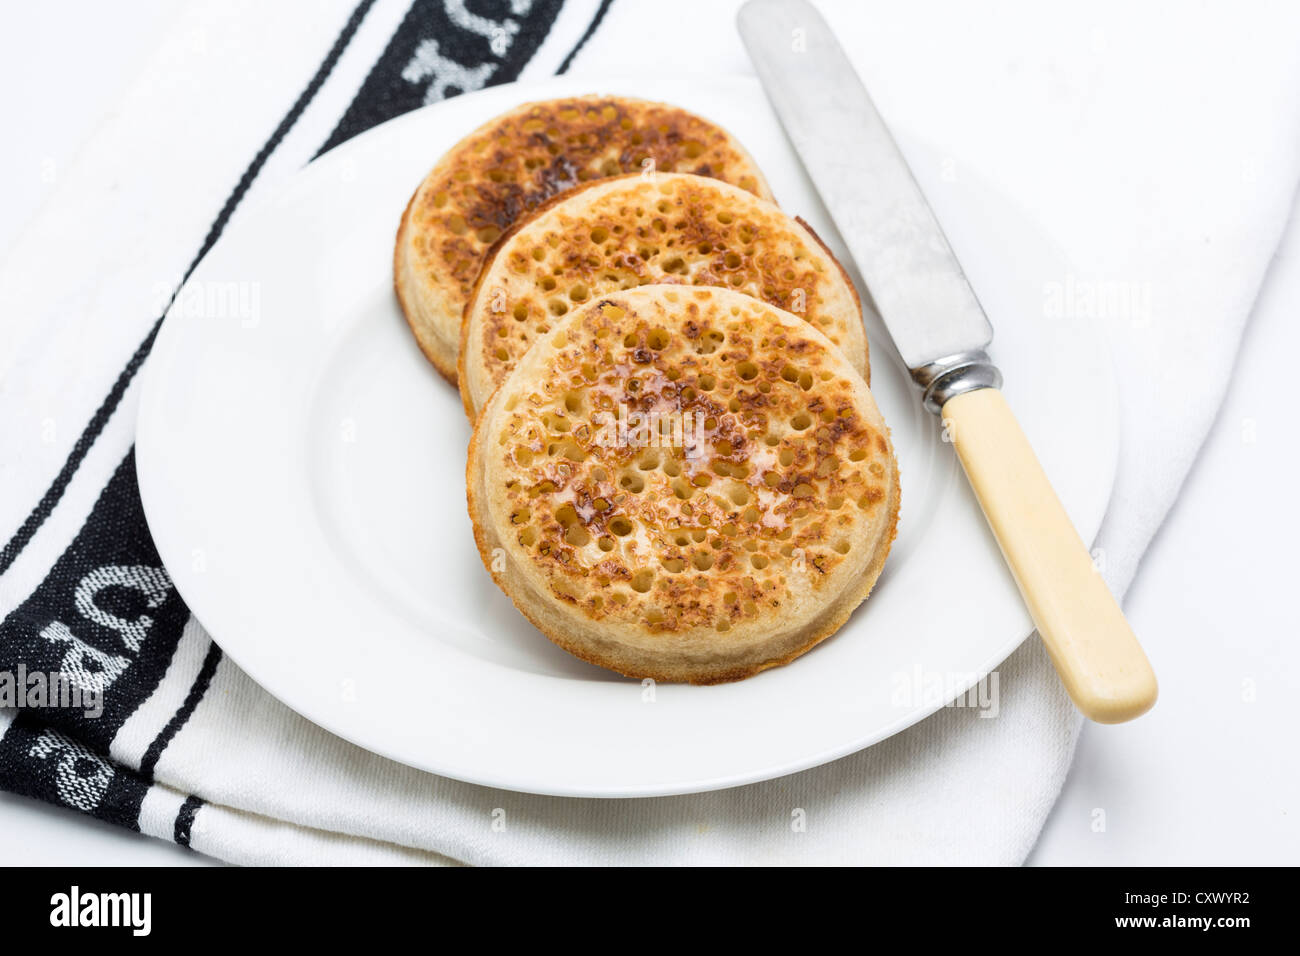 Buttered Crumpet Stock Photo